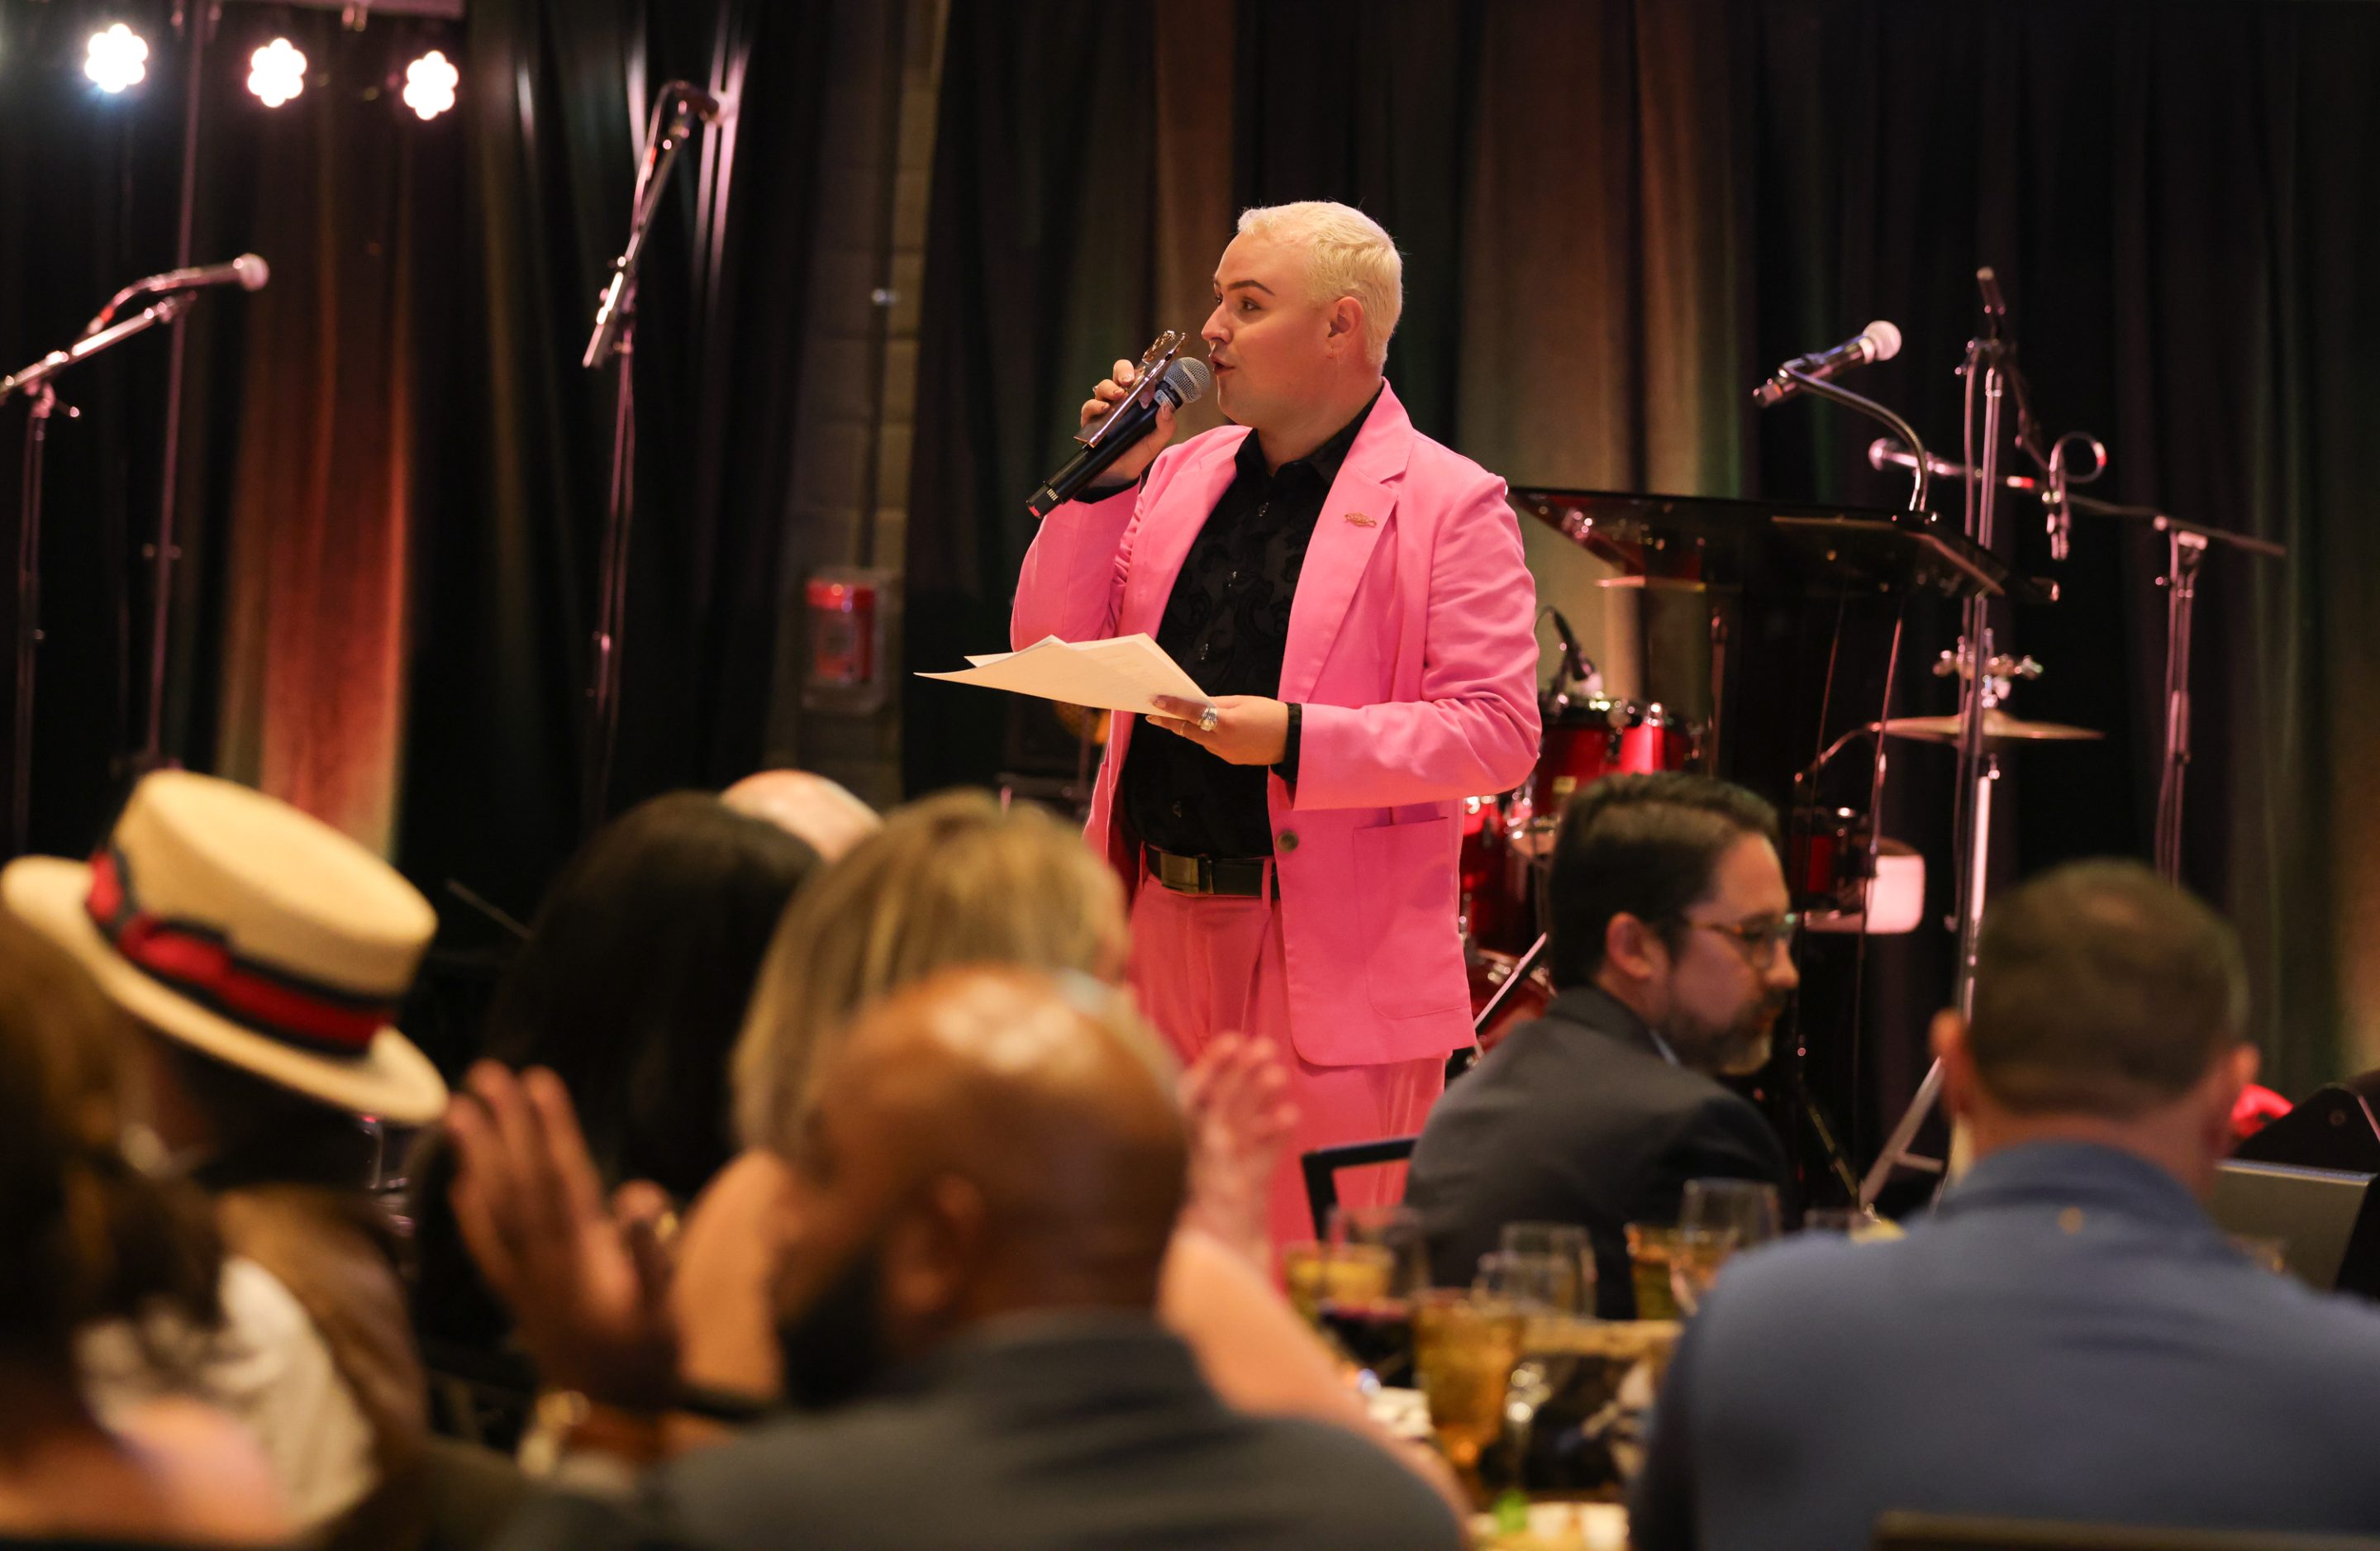 A man in a pink suit representing the LIME Foundation speaks into a microphone.